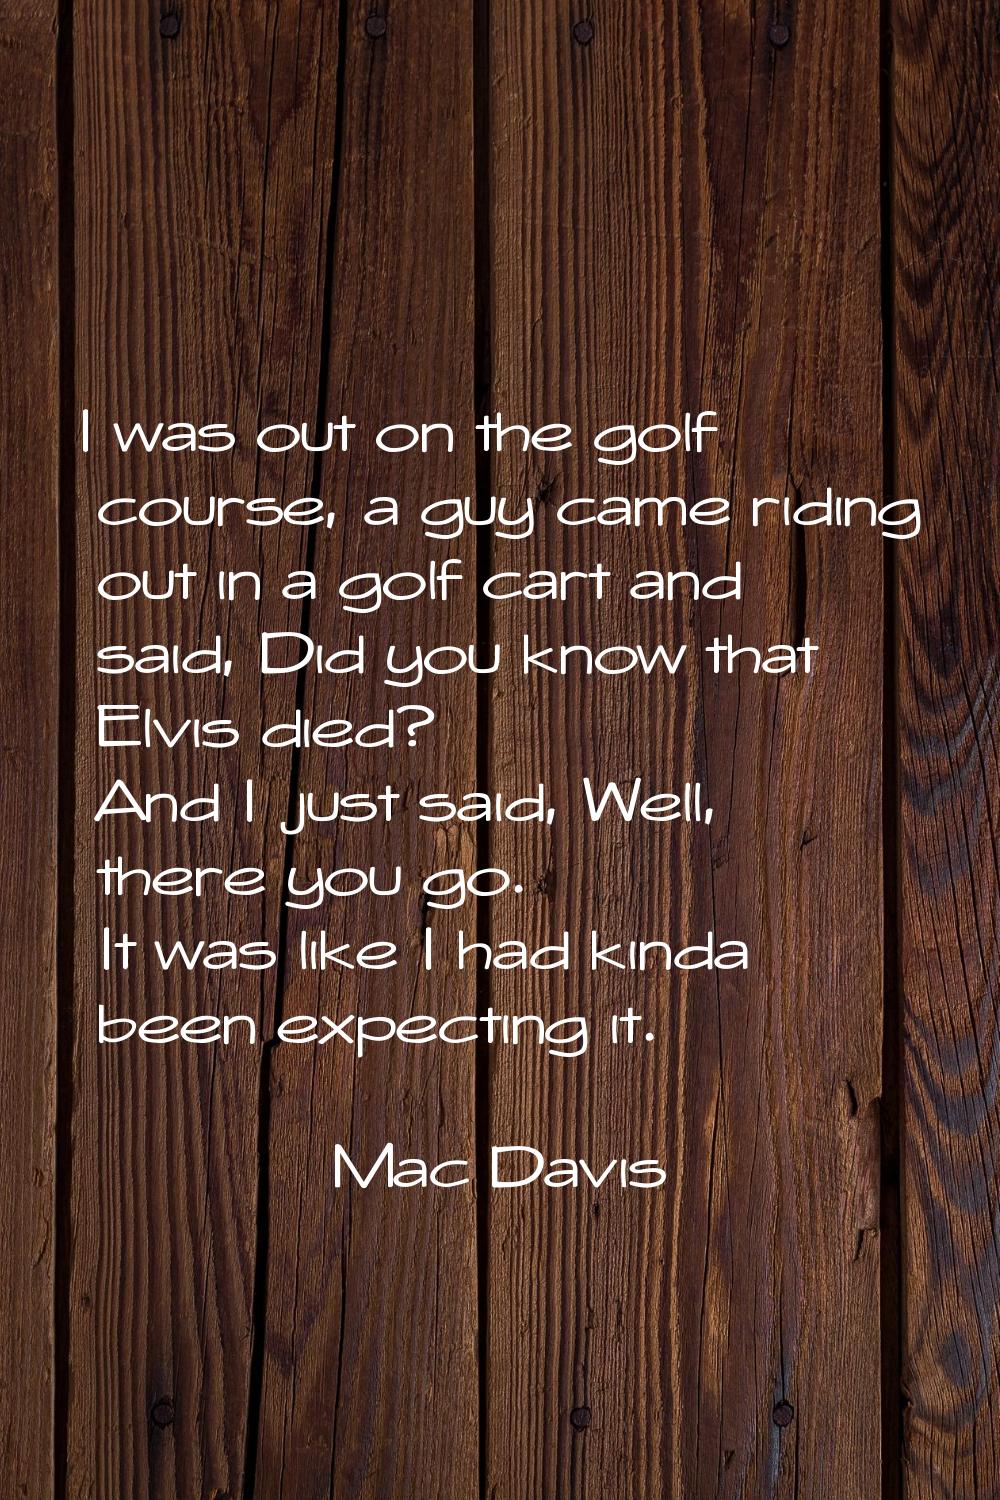 I was out on the golf course, a guy came riding out in a golf cart and said, Did you know that Elvi